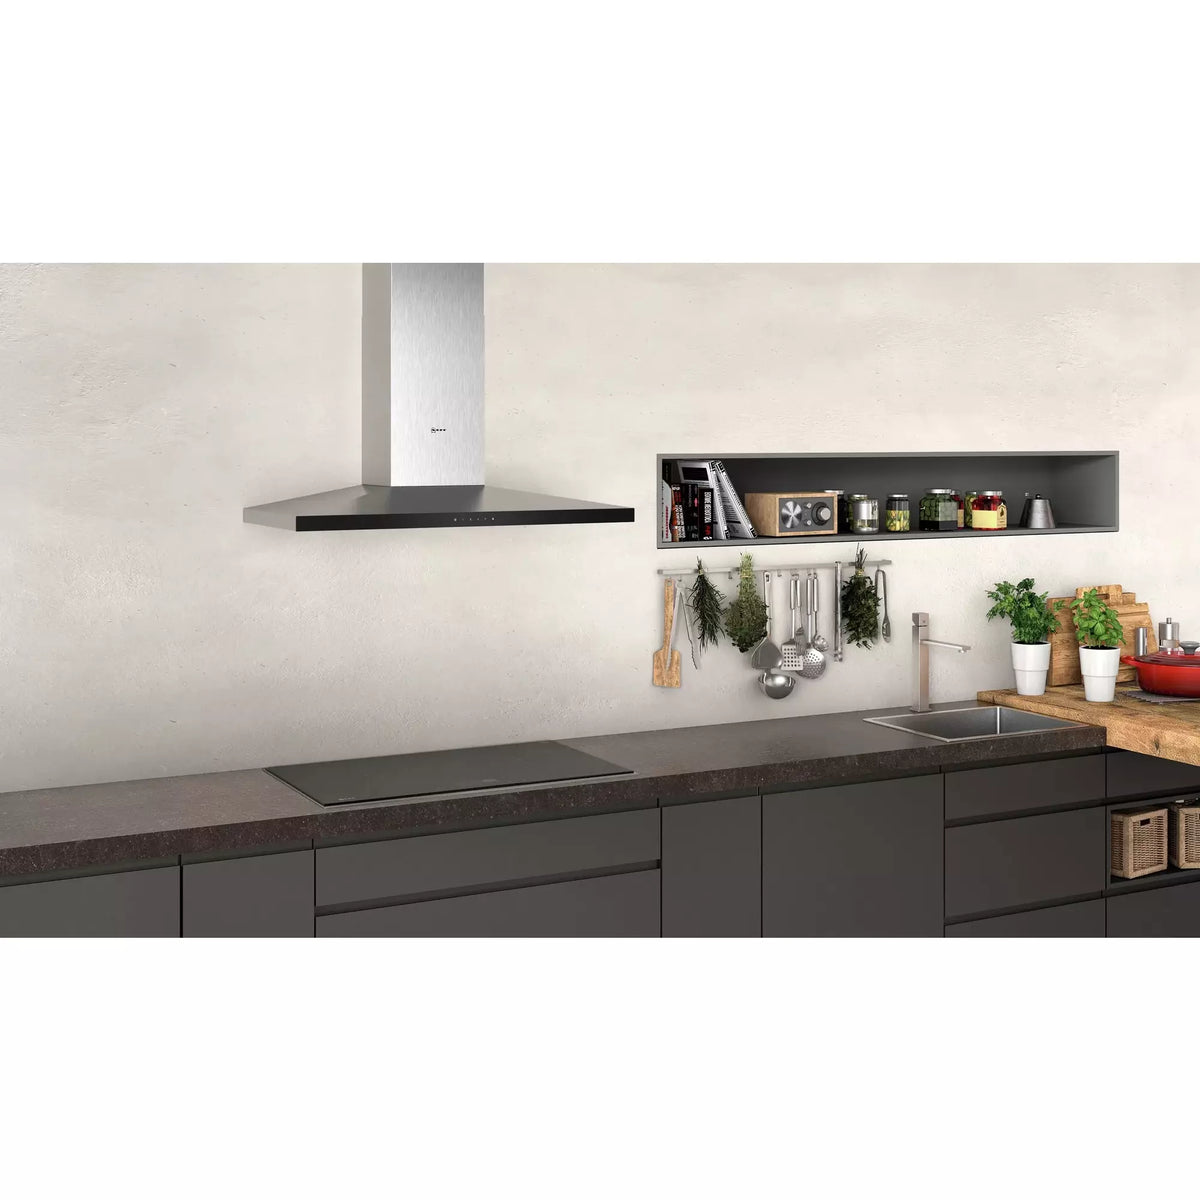 Neff N50 90cm Chimney Cooker Hood - Stainless Steel | D94QFM1N0B from Neff - DID Electrical